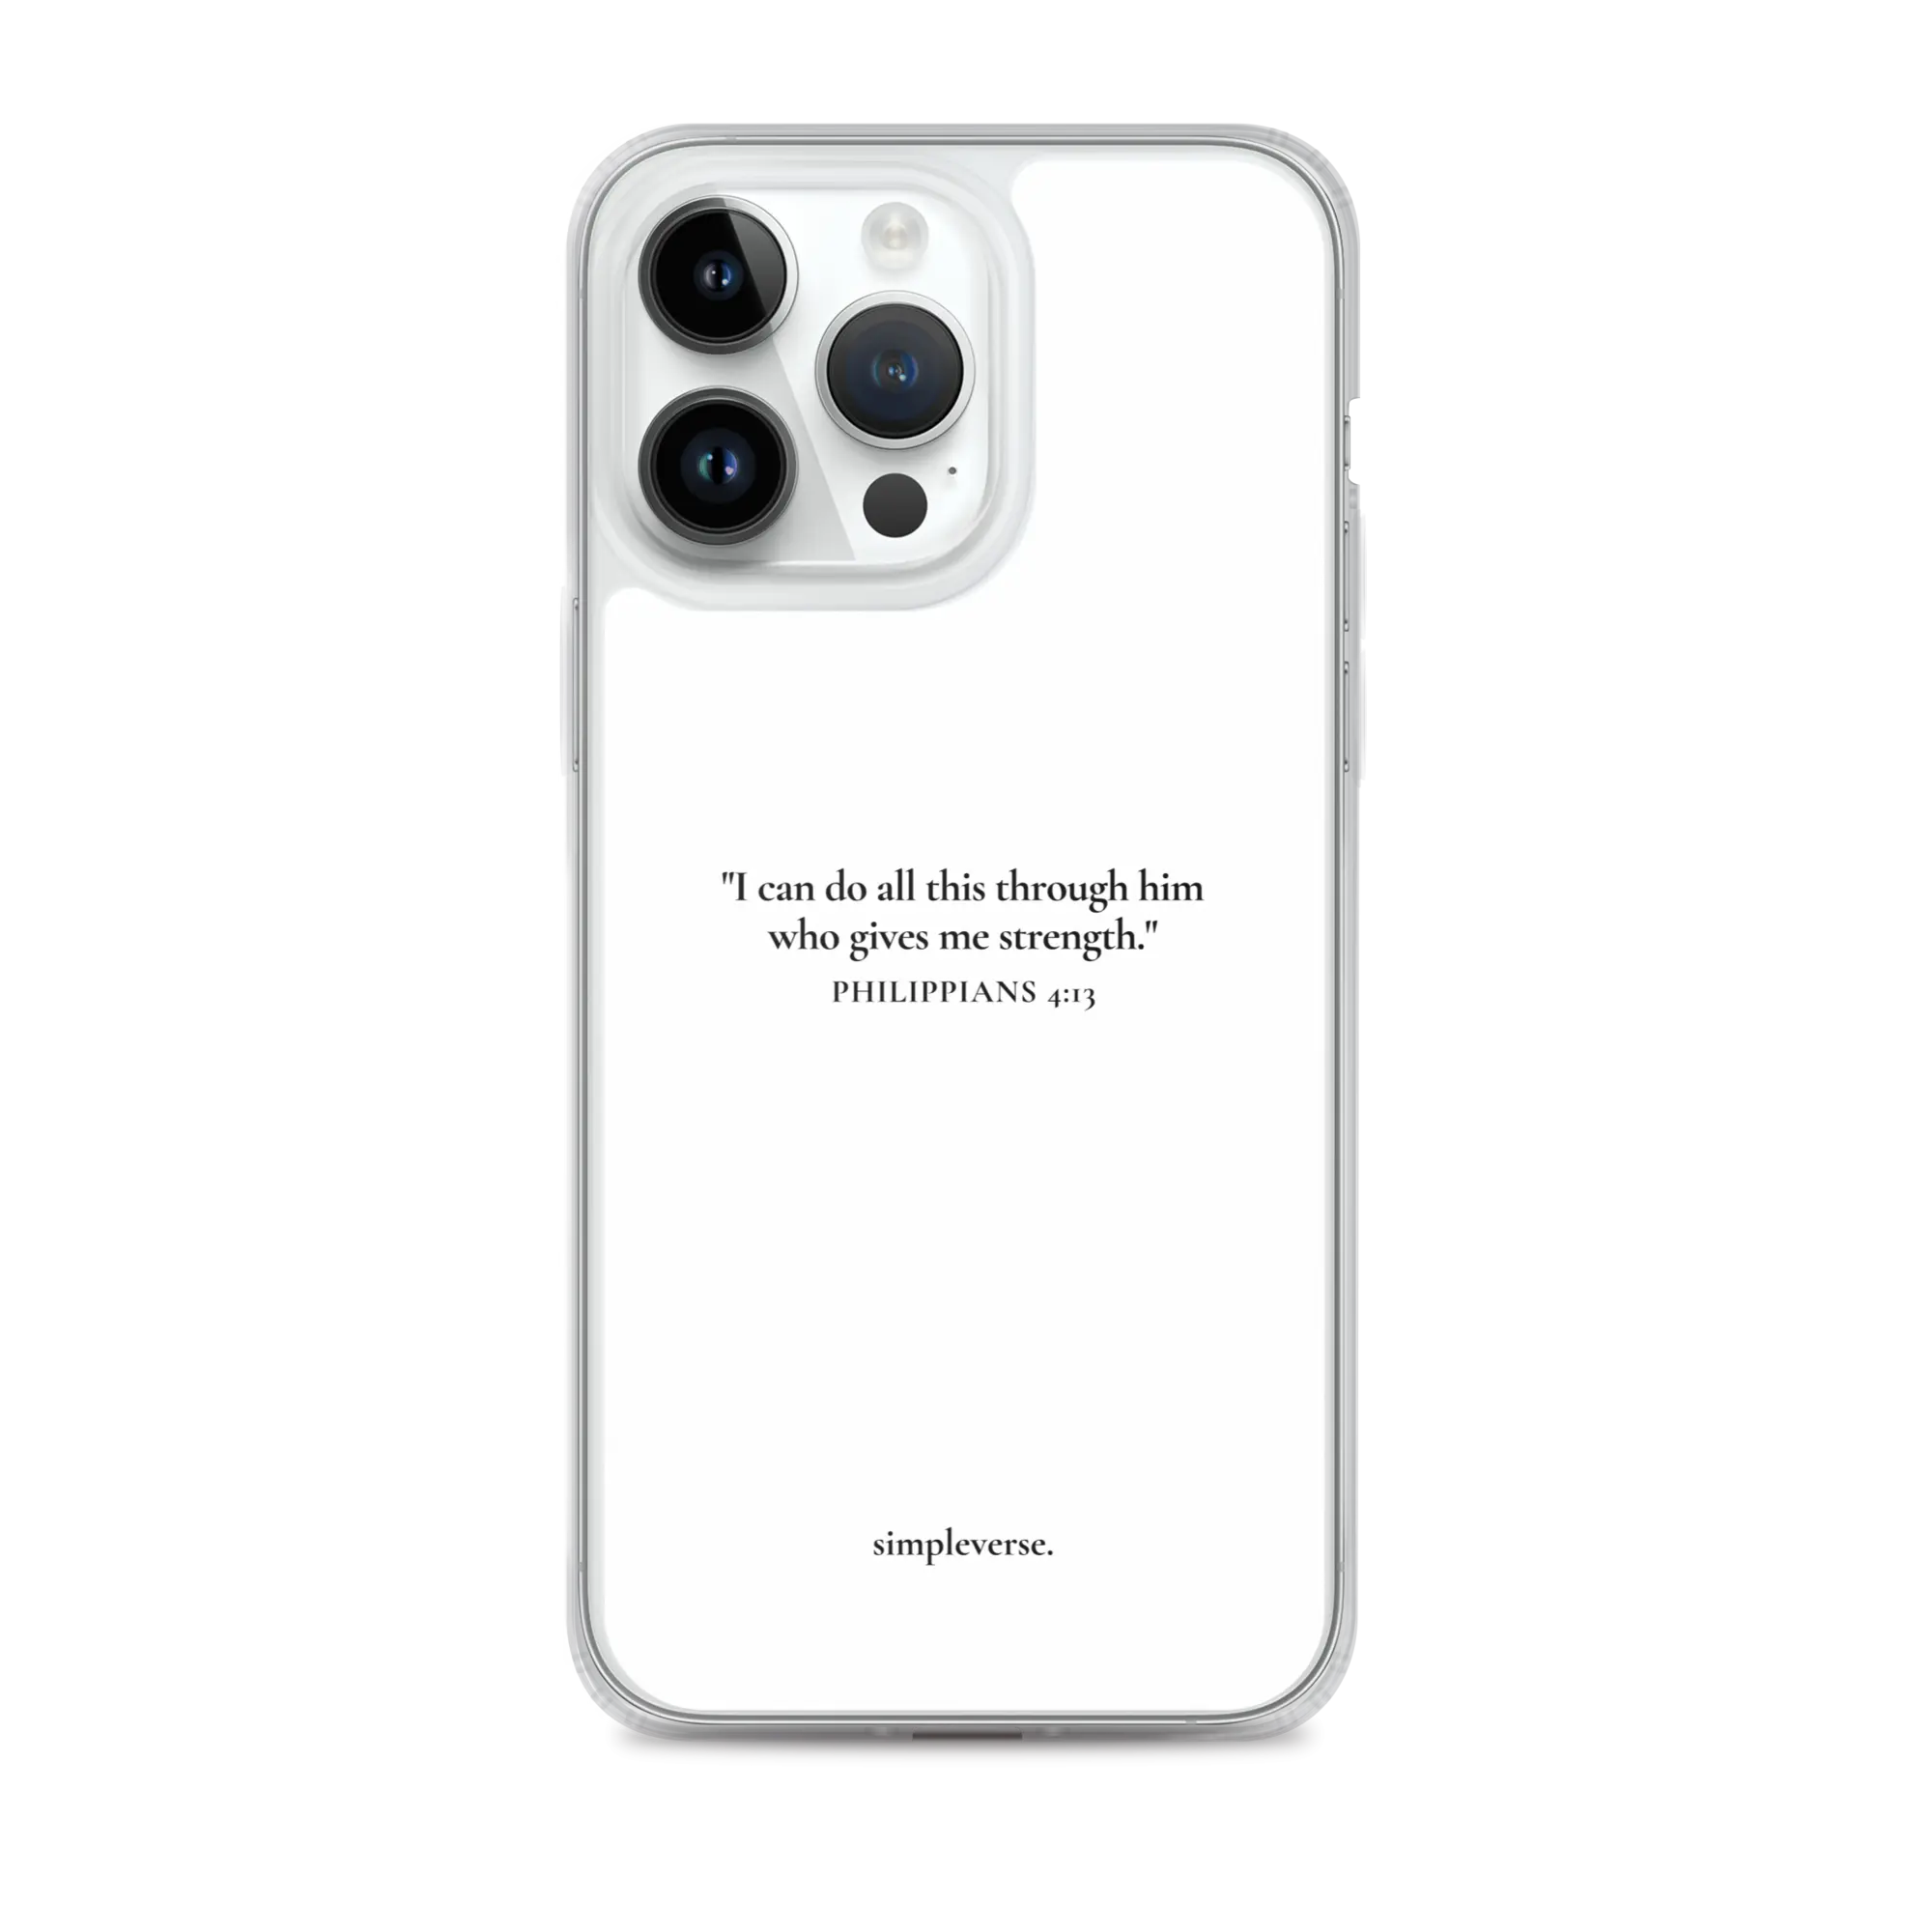 Clear Christian iPhone case displaying 'I can do all this through him who gives me strength - Philippians 4:13' in elegant typography.